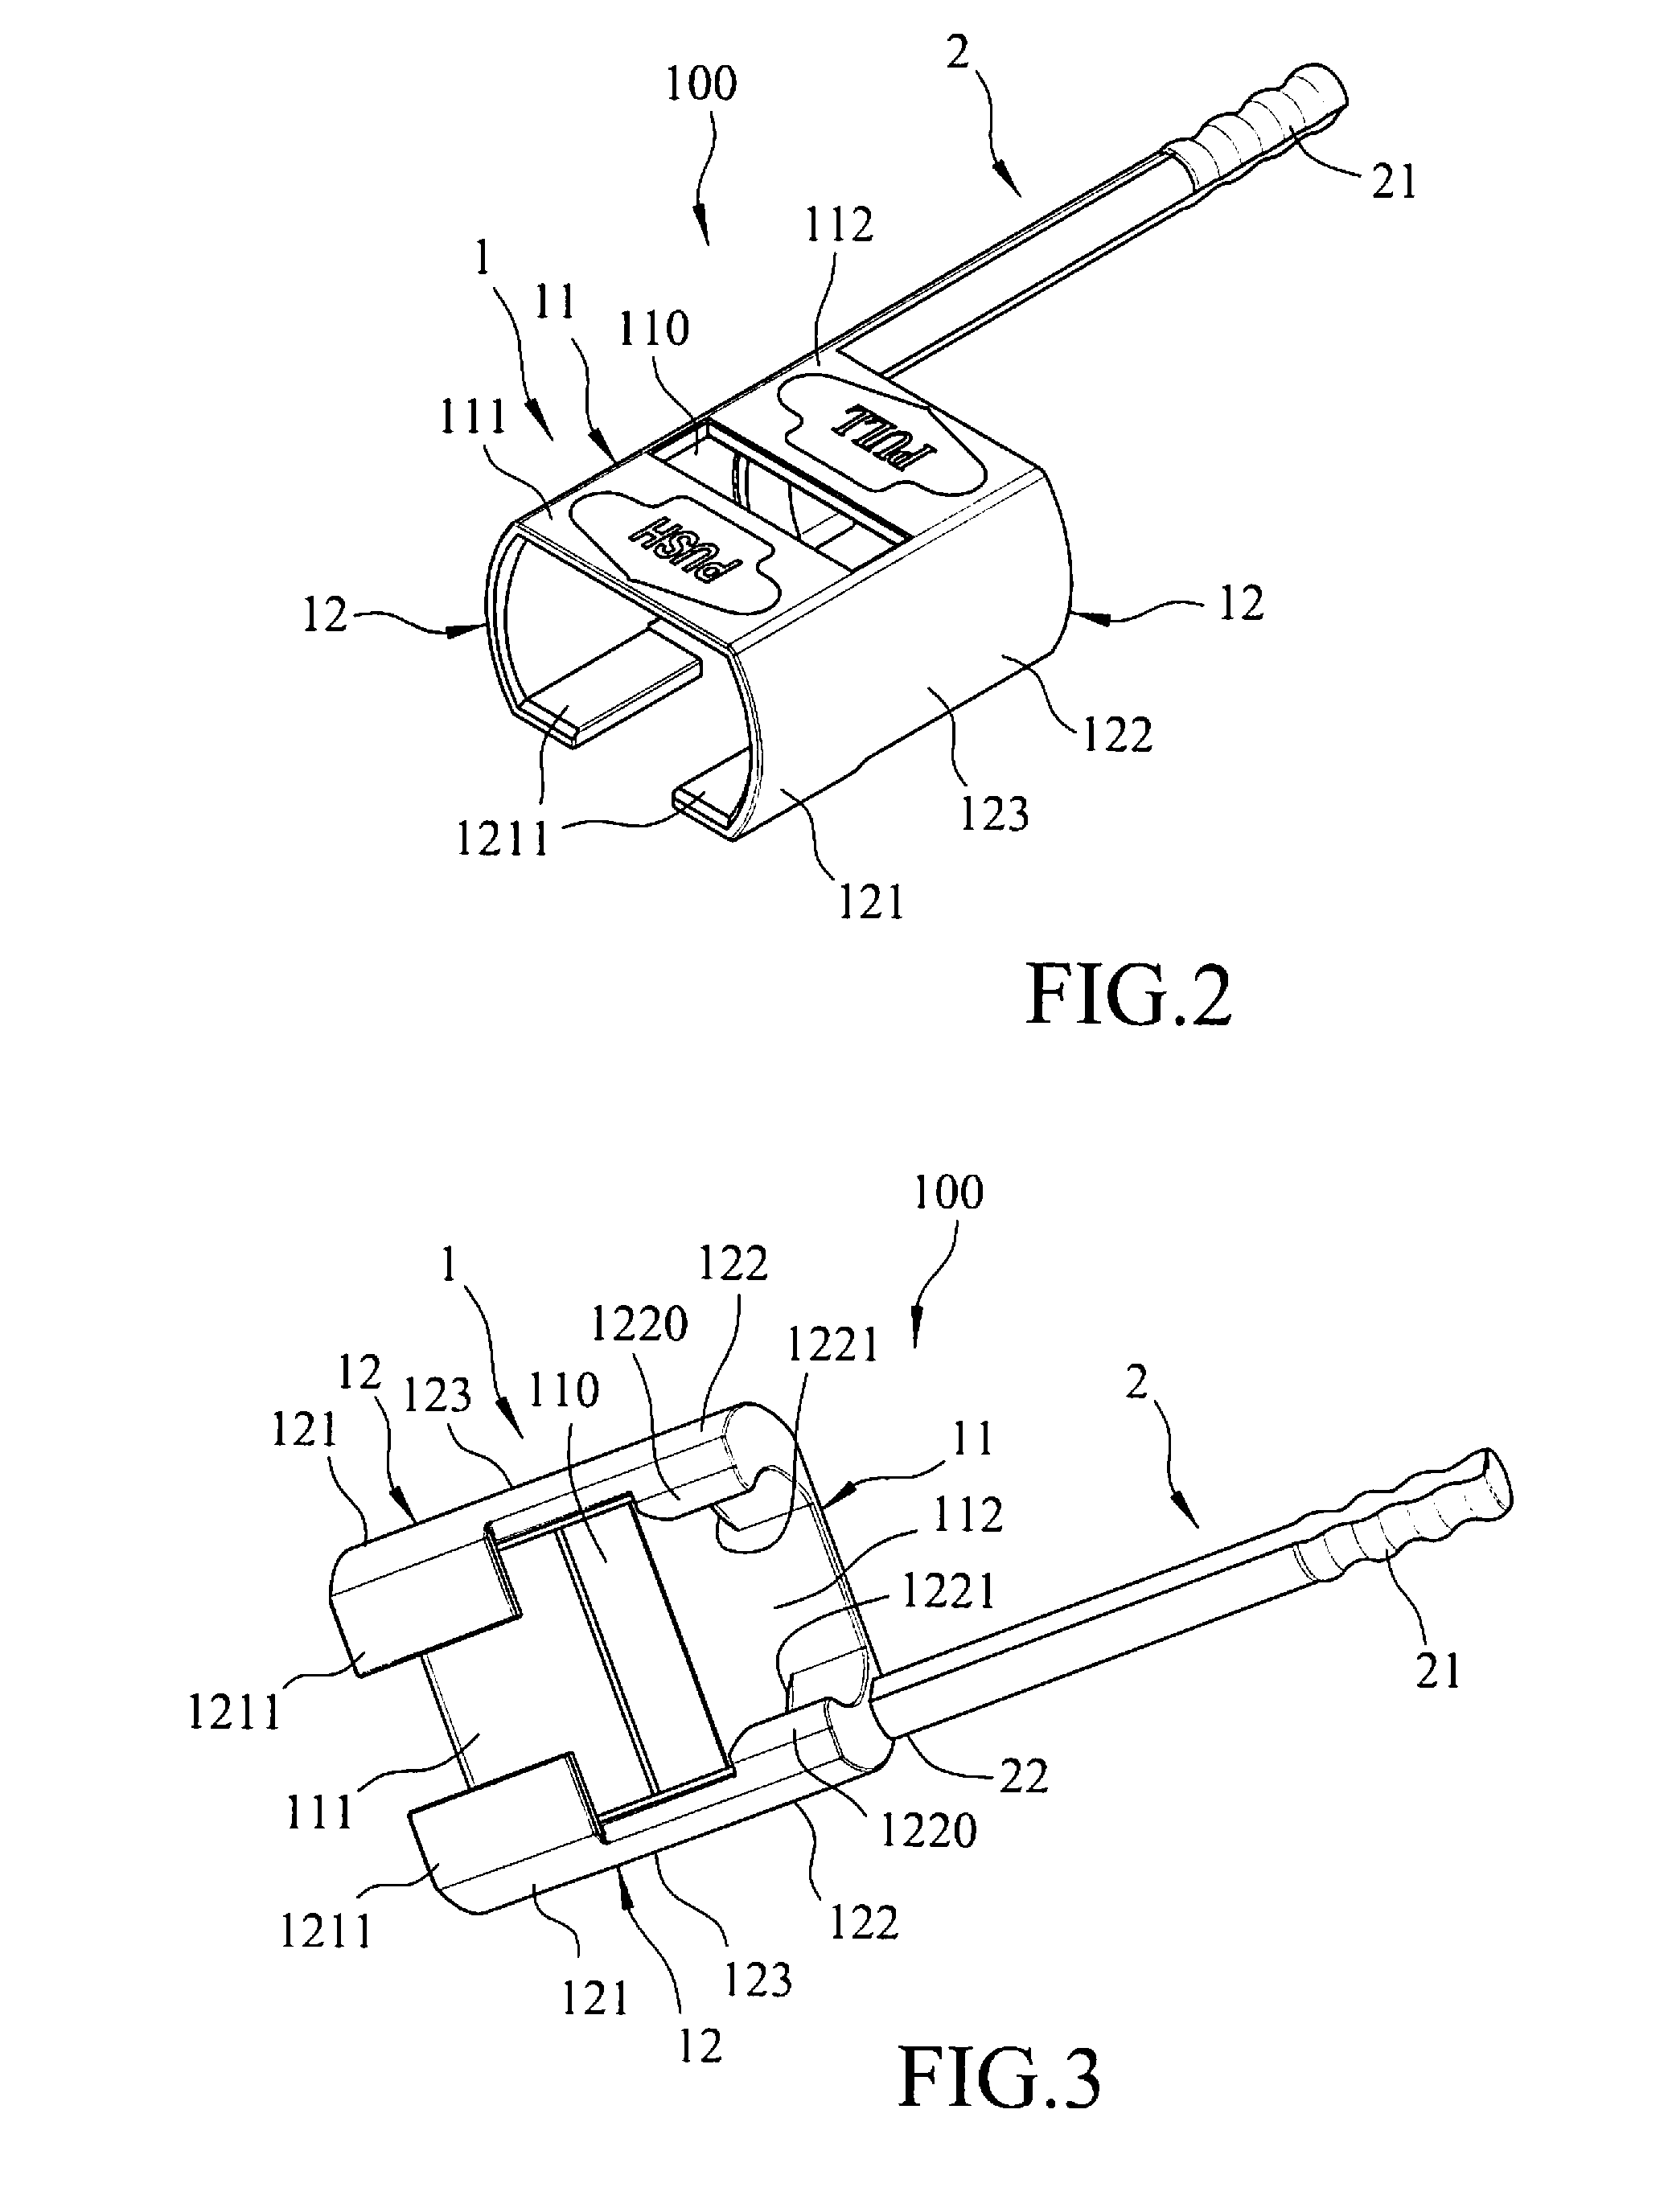 Clip device for facilitating insertion and removal of a push-pull fiber optic connector